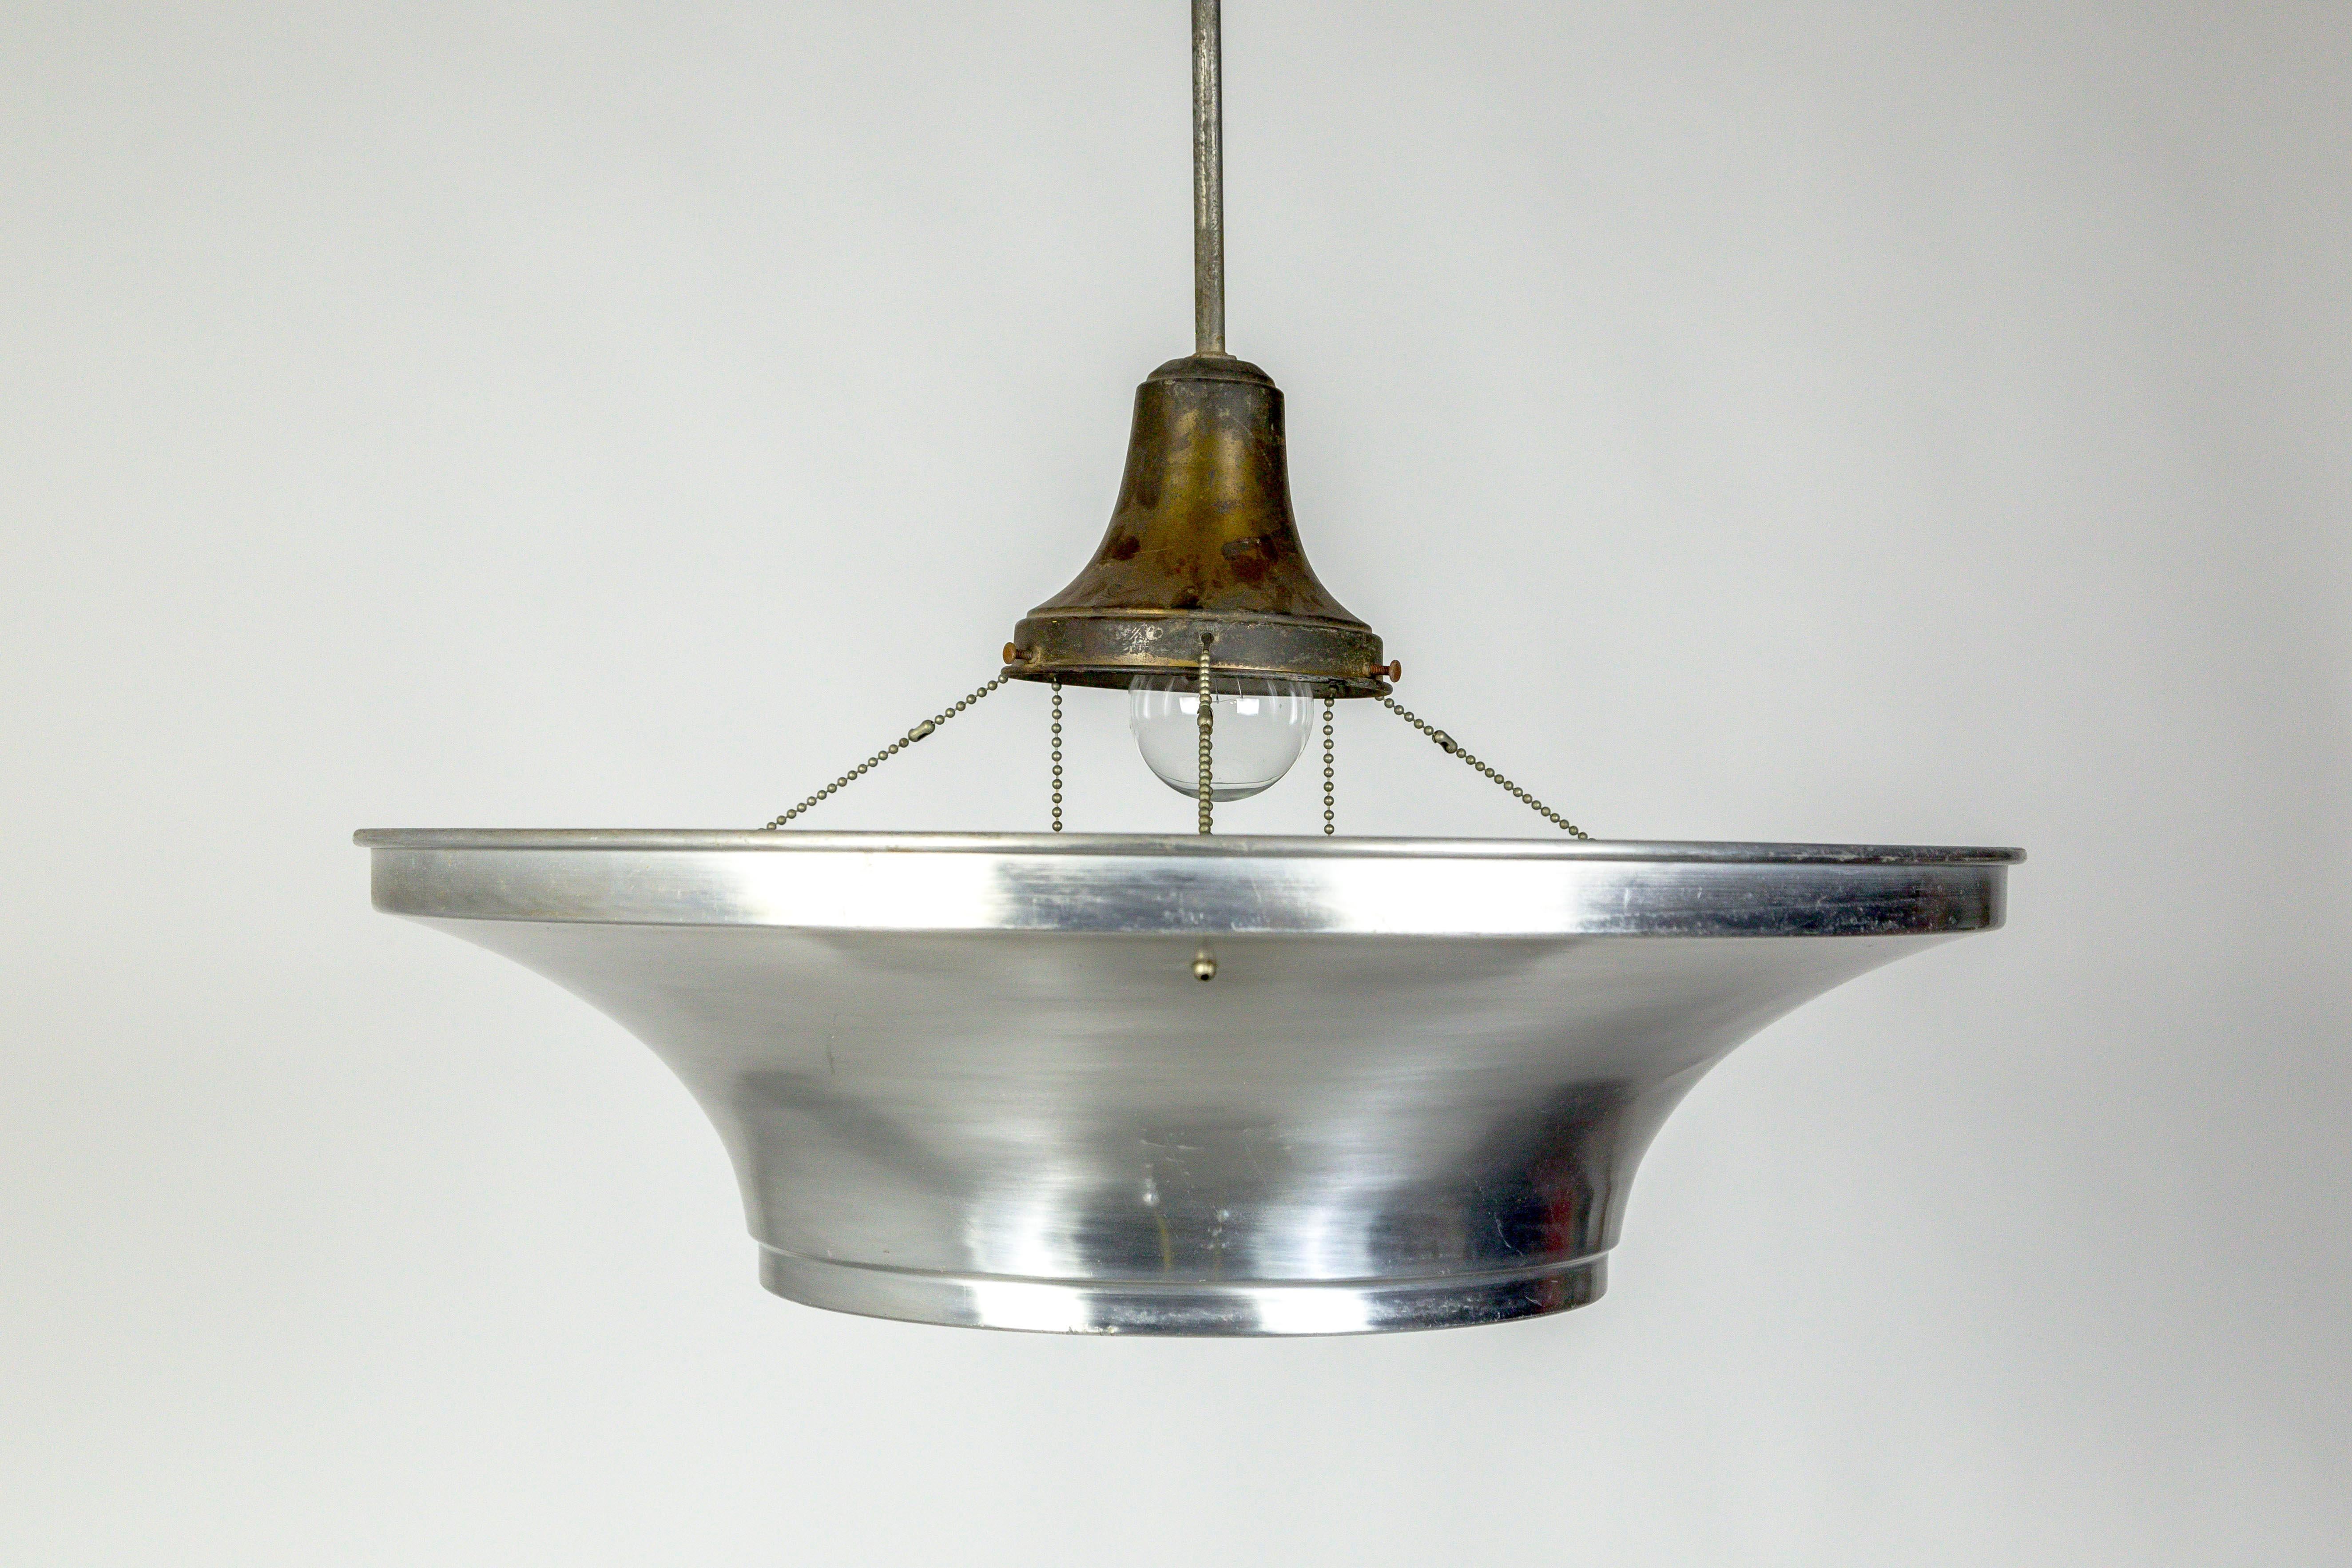 Art Deco pendant lights with an Industrial look; aluminum dishes hanging from delicate ball chain, holding thick, radial ribbed glass diffusers. With a long, slim stem, 63